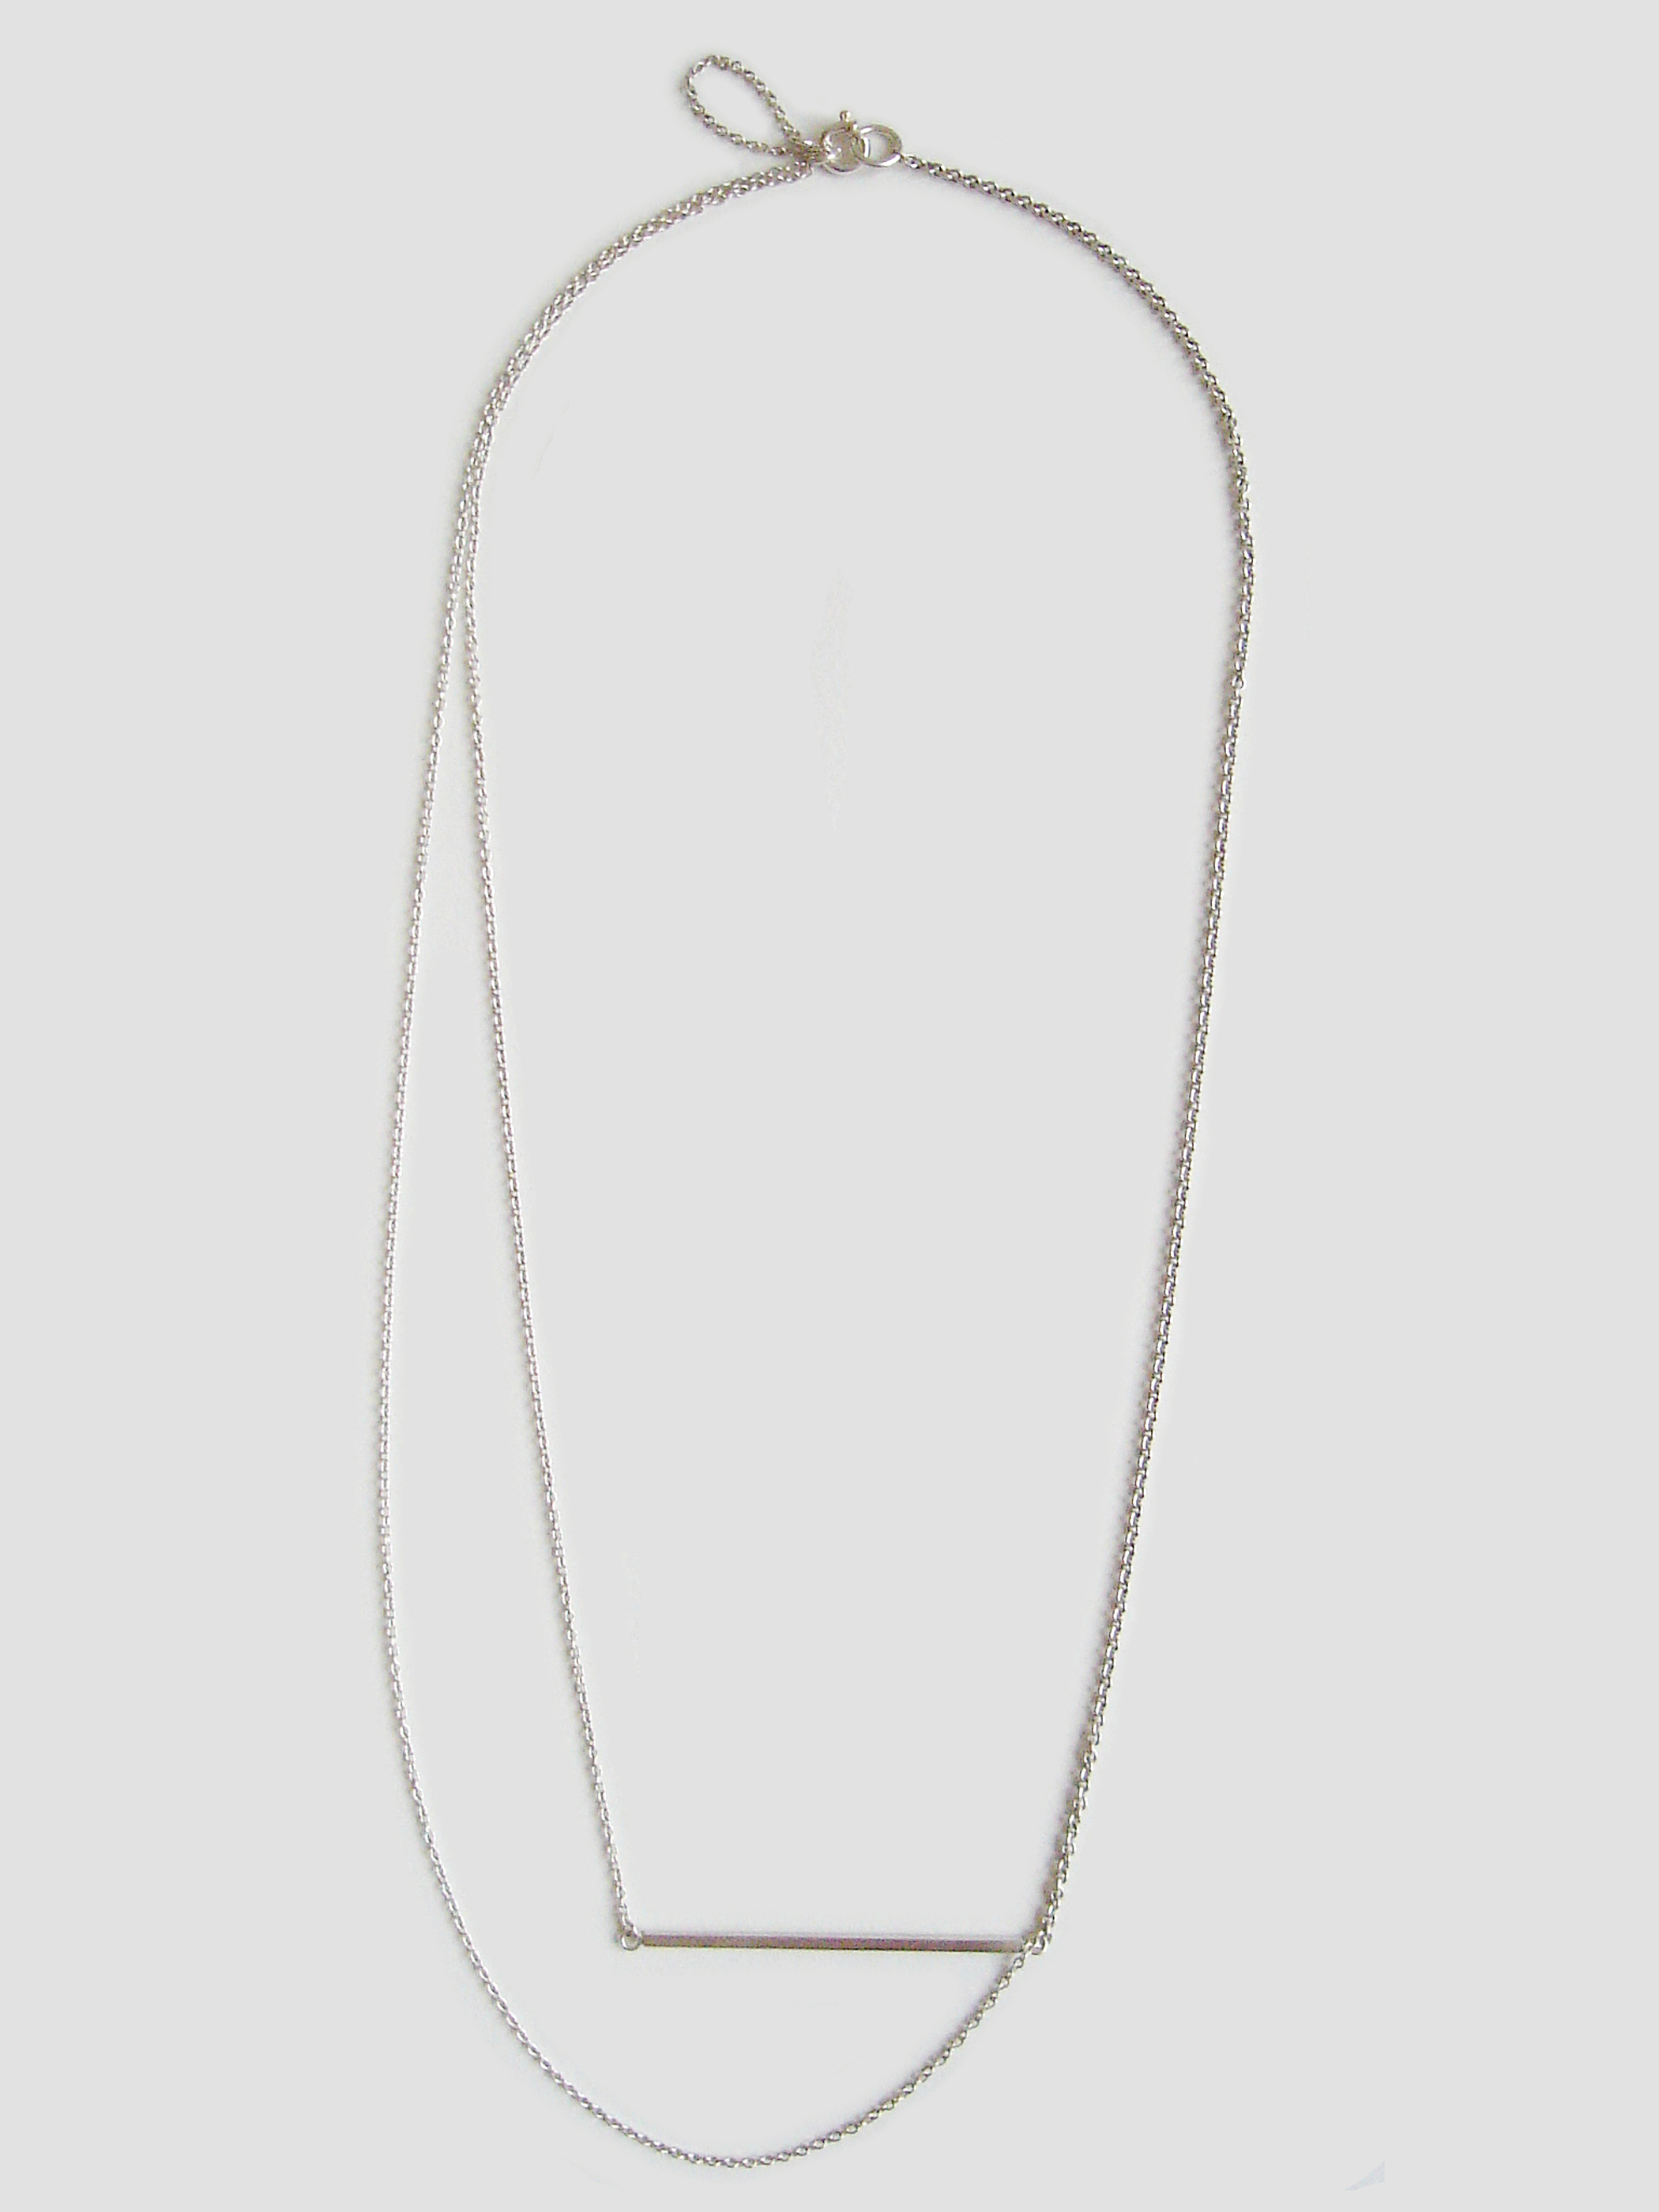 Naoko Ogawa / S3 necklace - gallery deux poissons online